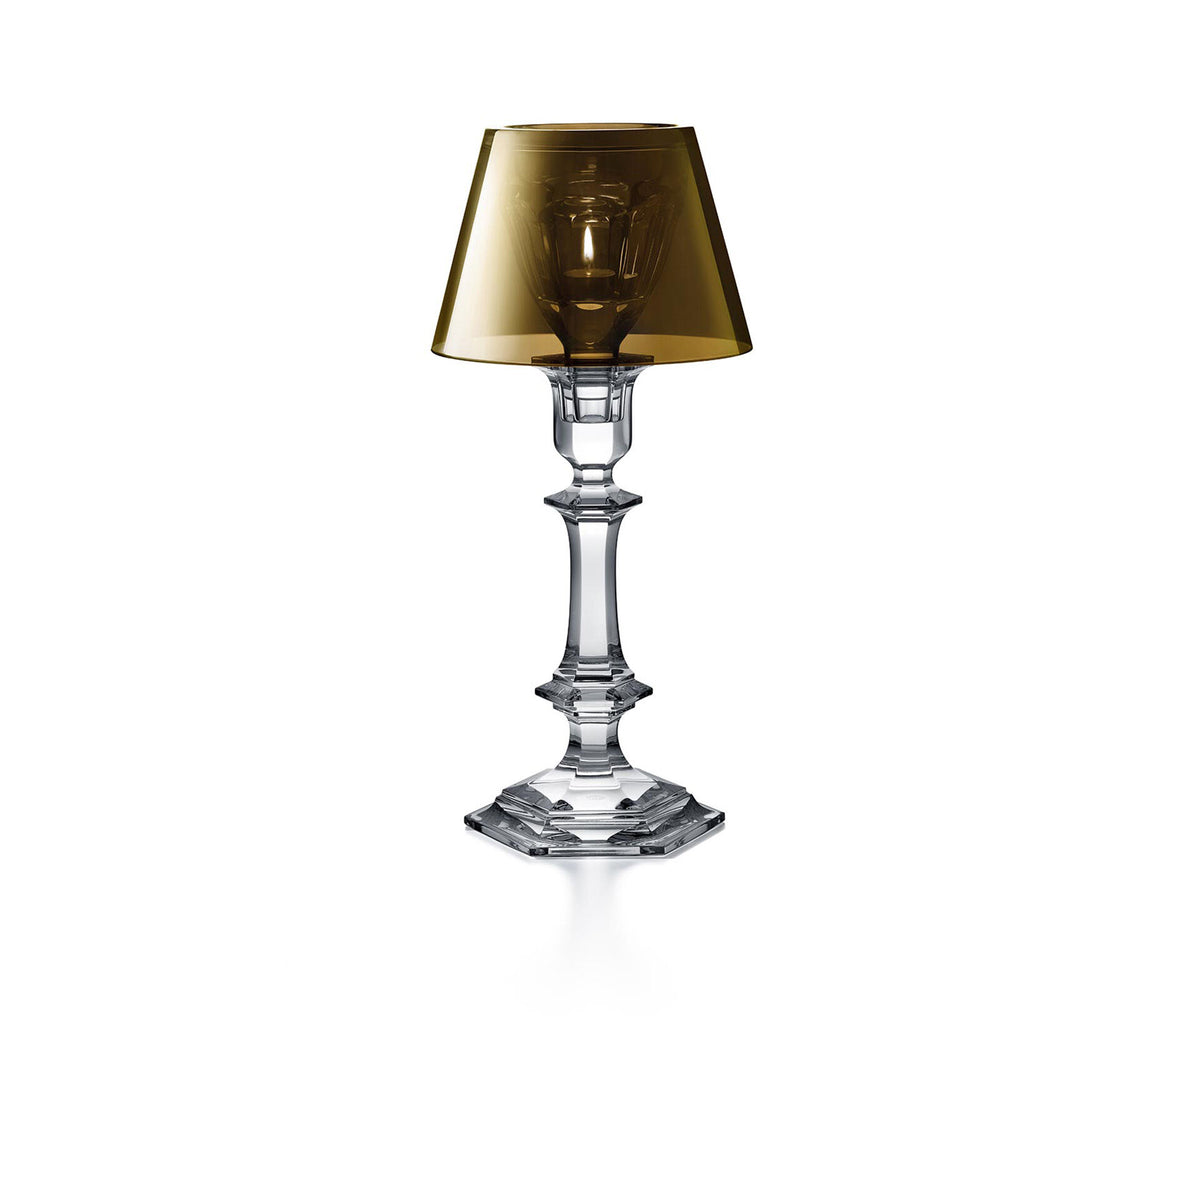 Baccarat Harcourt Our Fire Candlestick – The Little House Shop